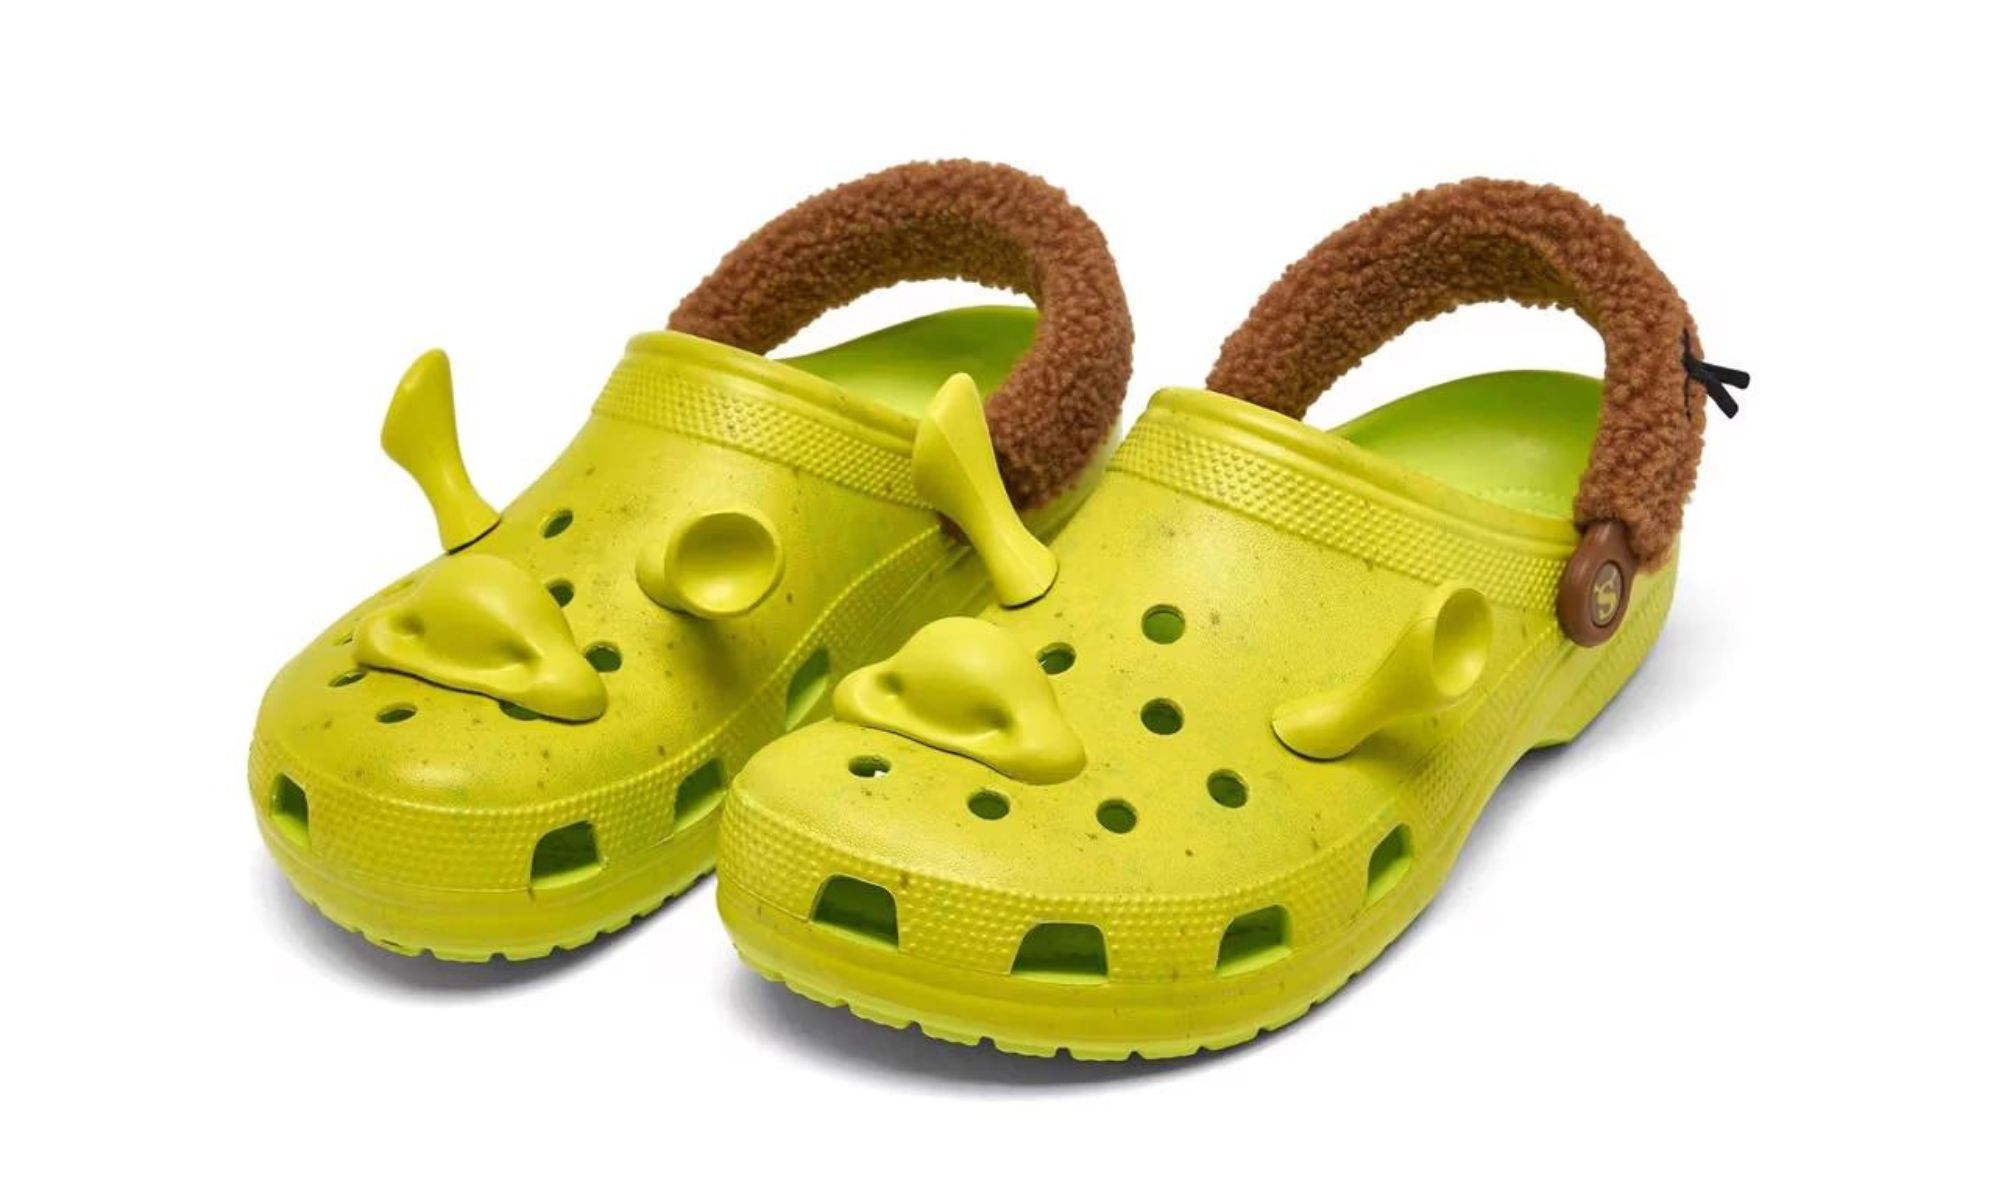 Barbie and Crocs Announce Collaboration